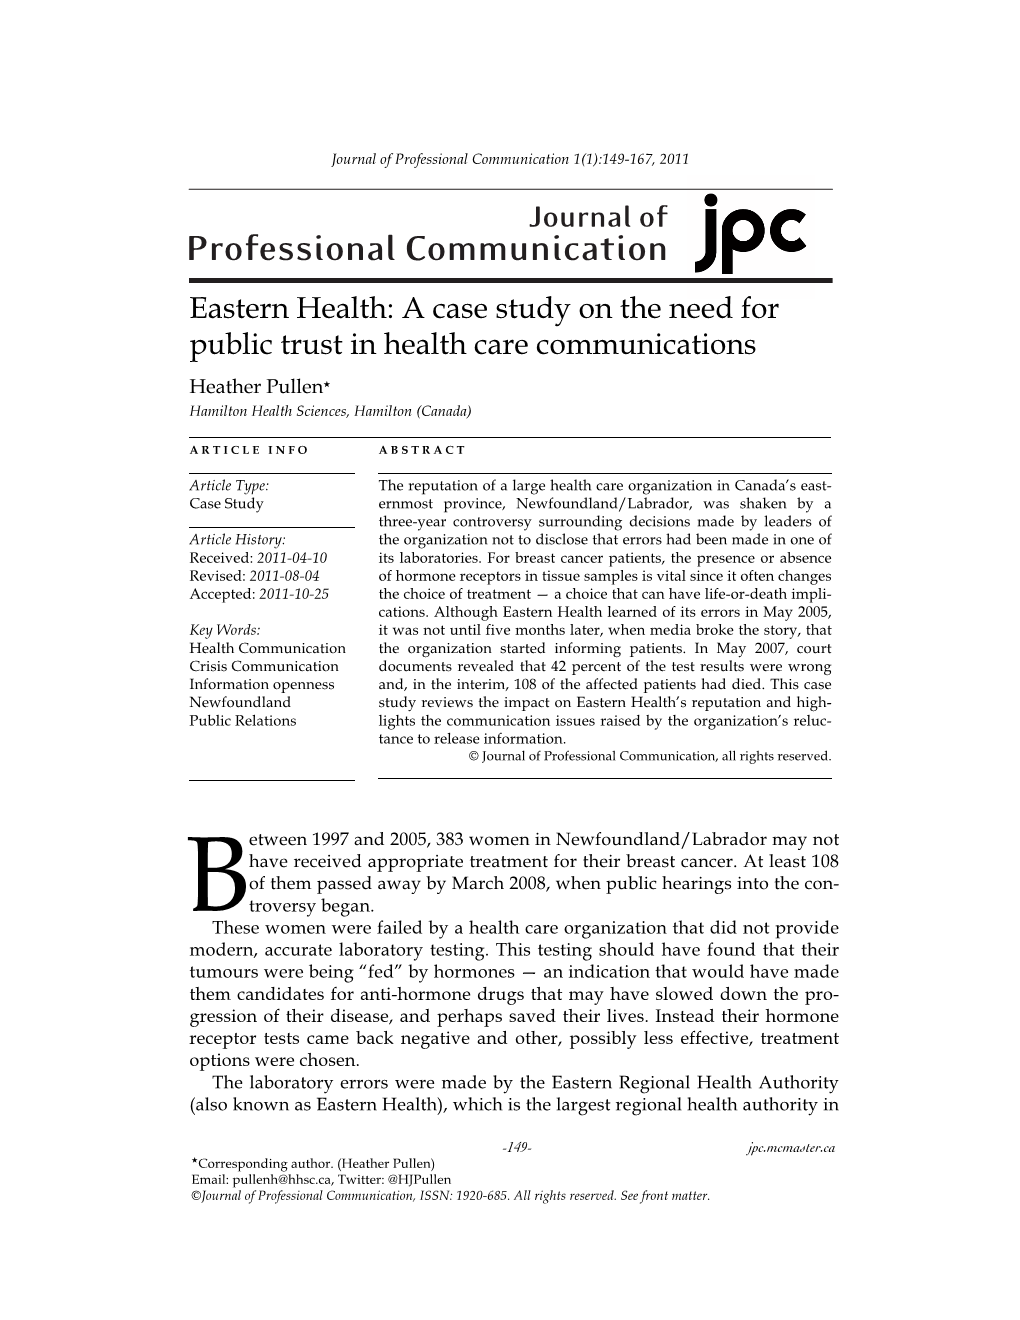 Eastern Health: a Case Study on the Need for Public Trust in Health Care Communications